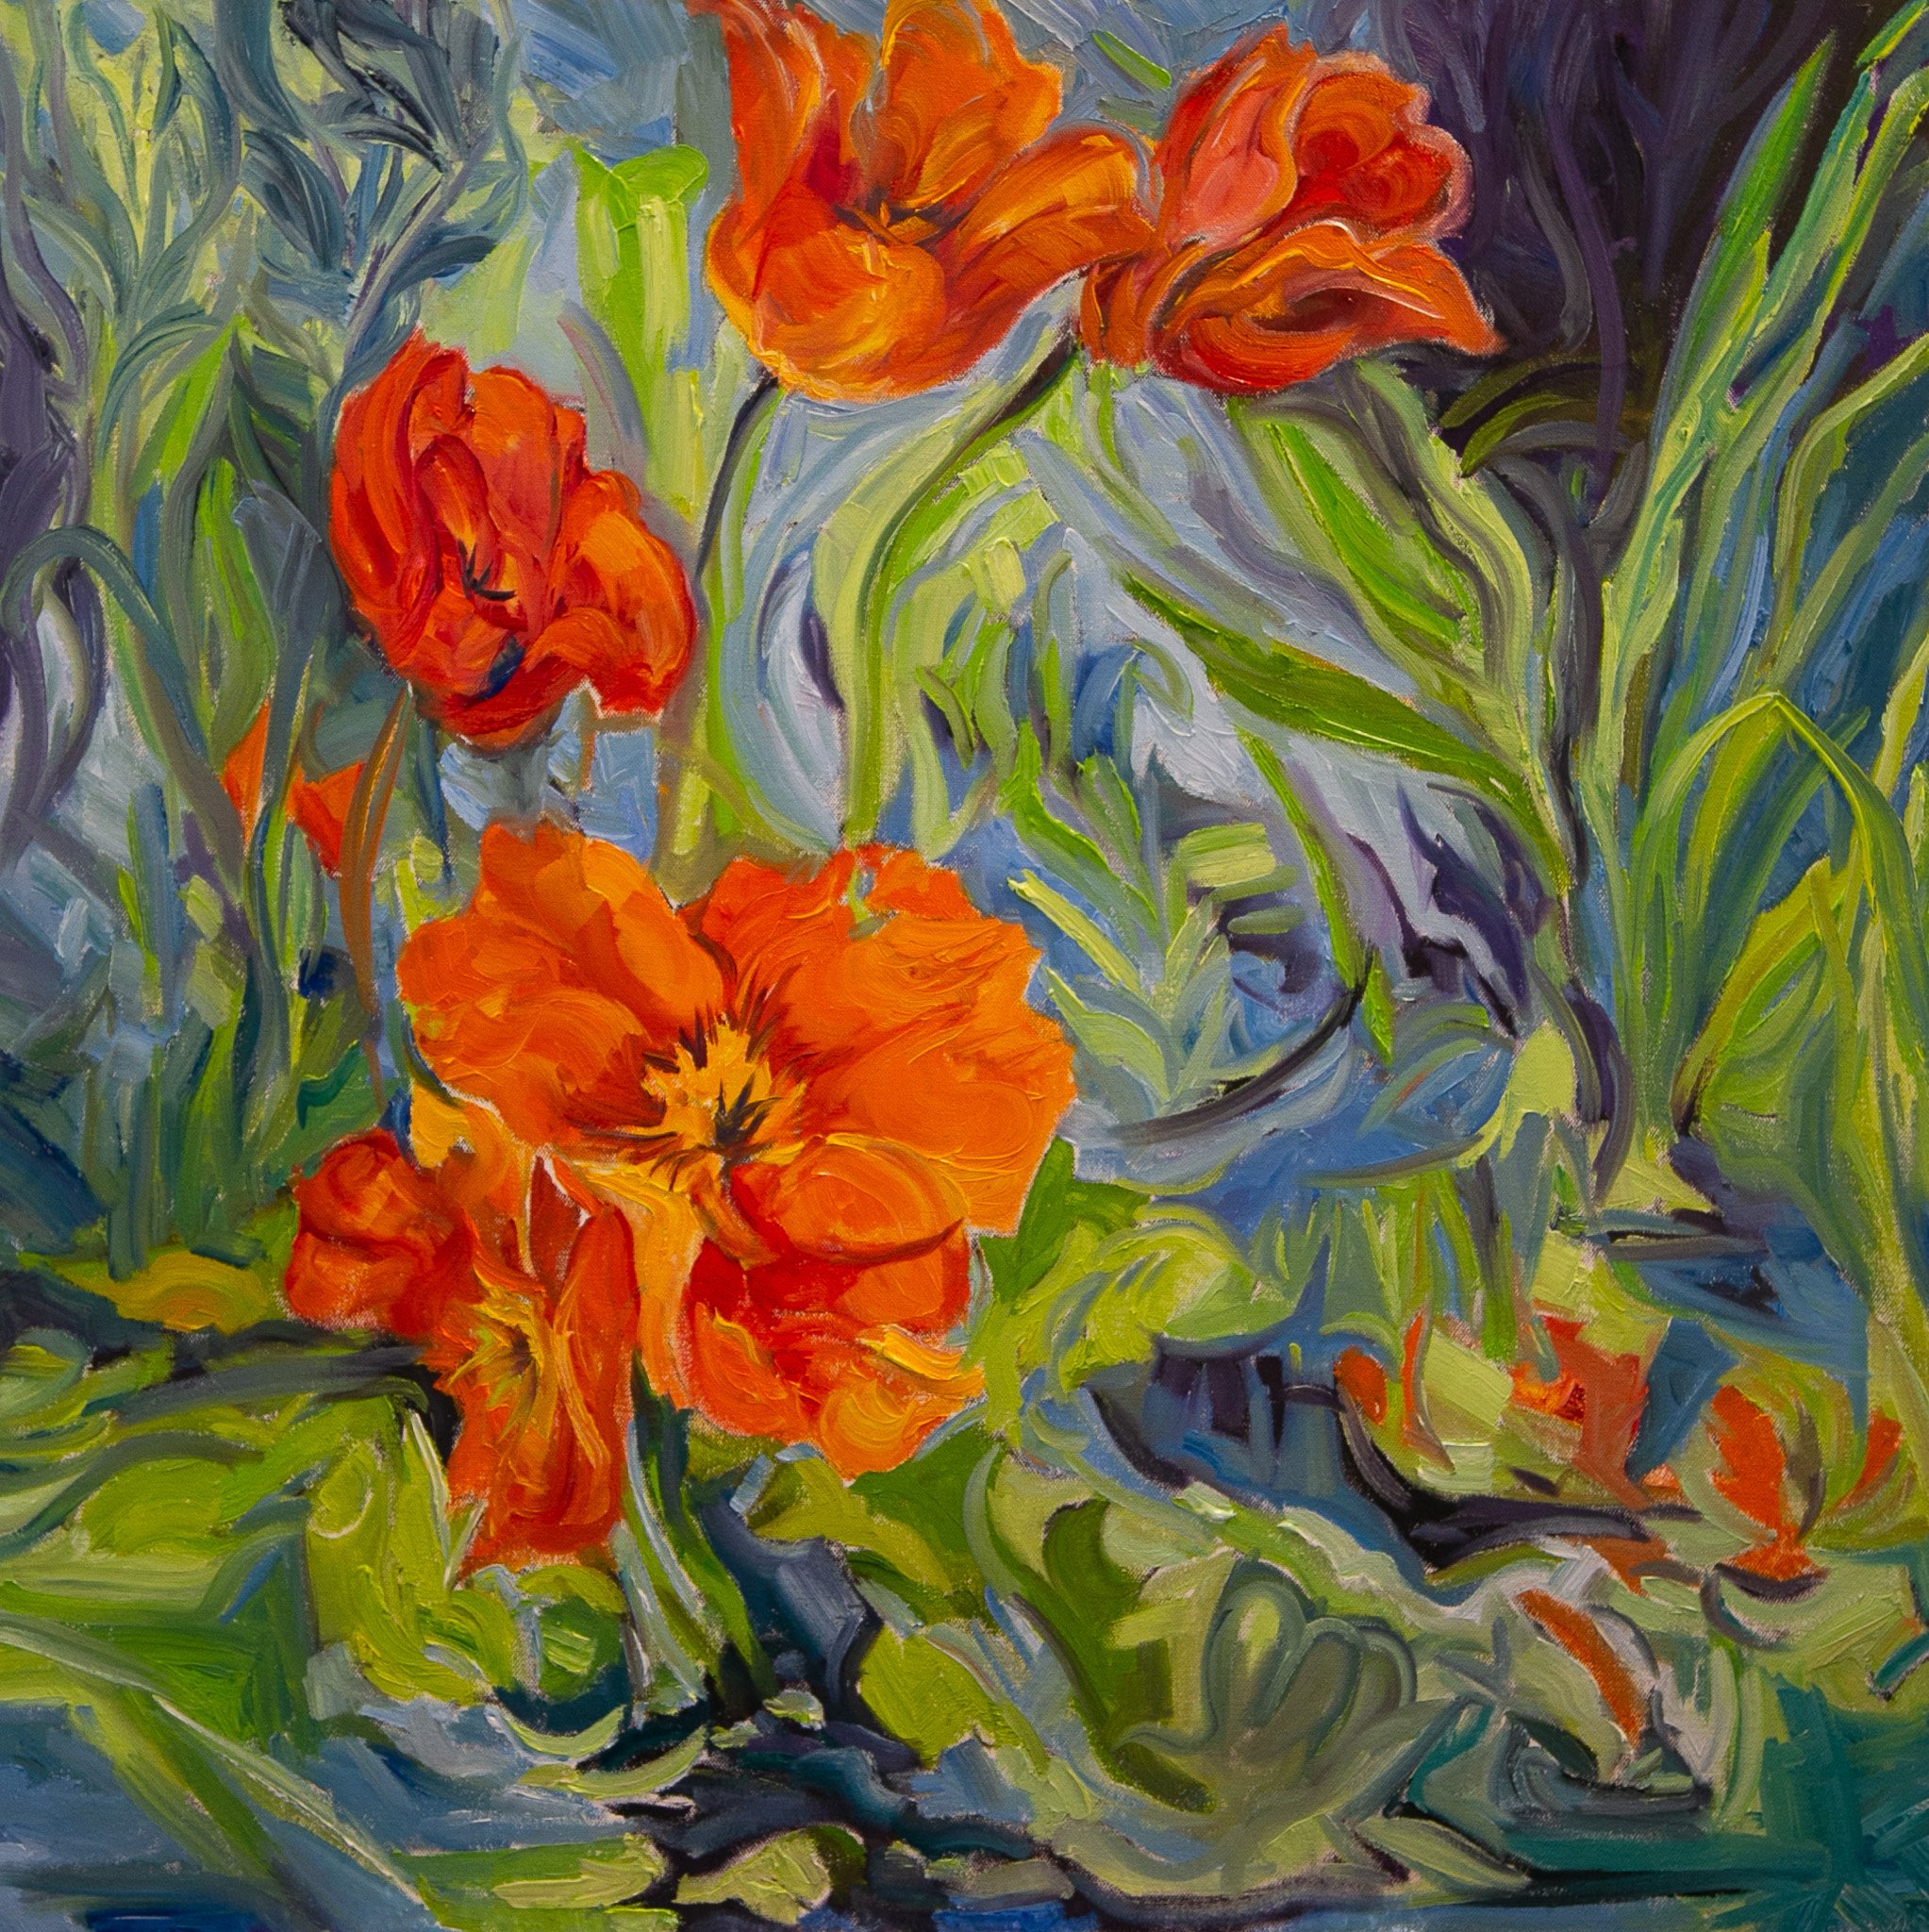   Spring   Oil on canvas  30" x 30"  Private collection 